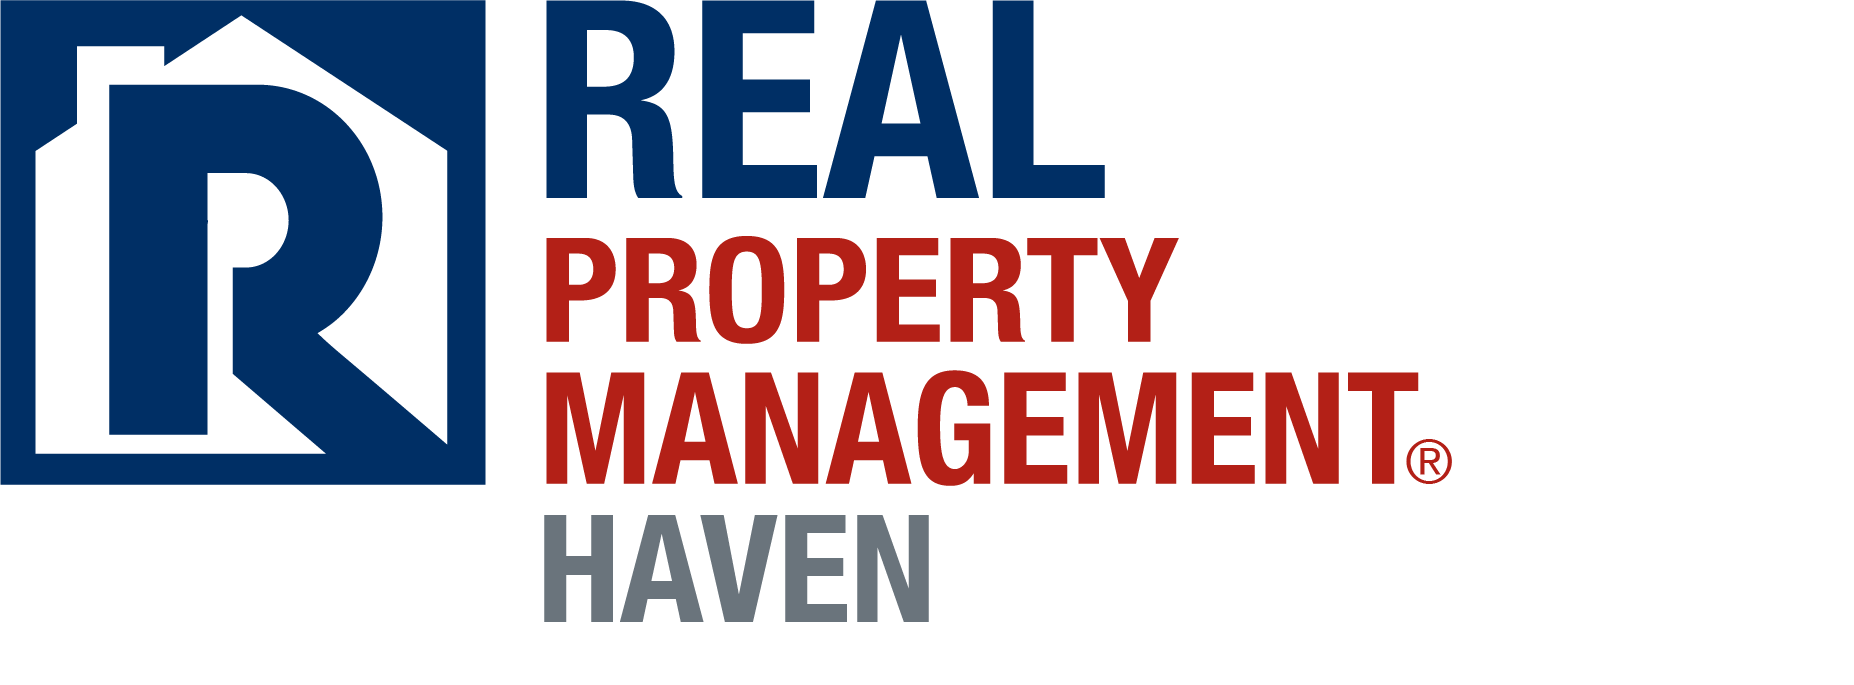 Real Property Management Haven Inc.